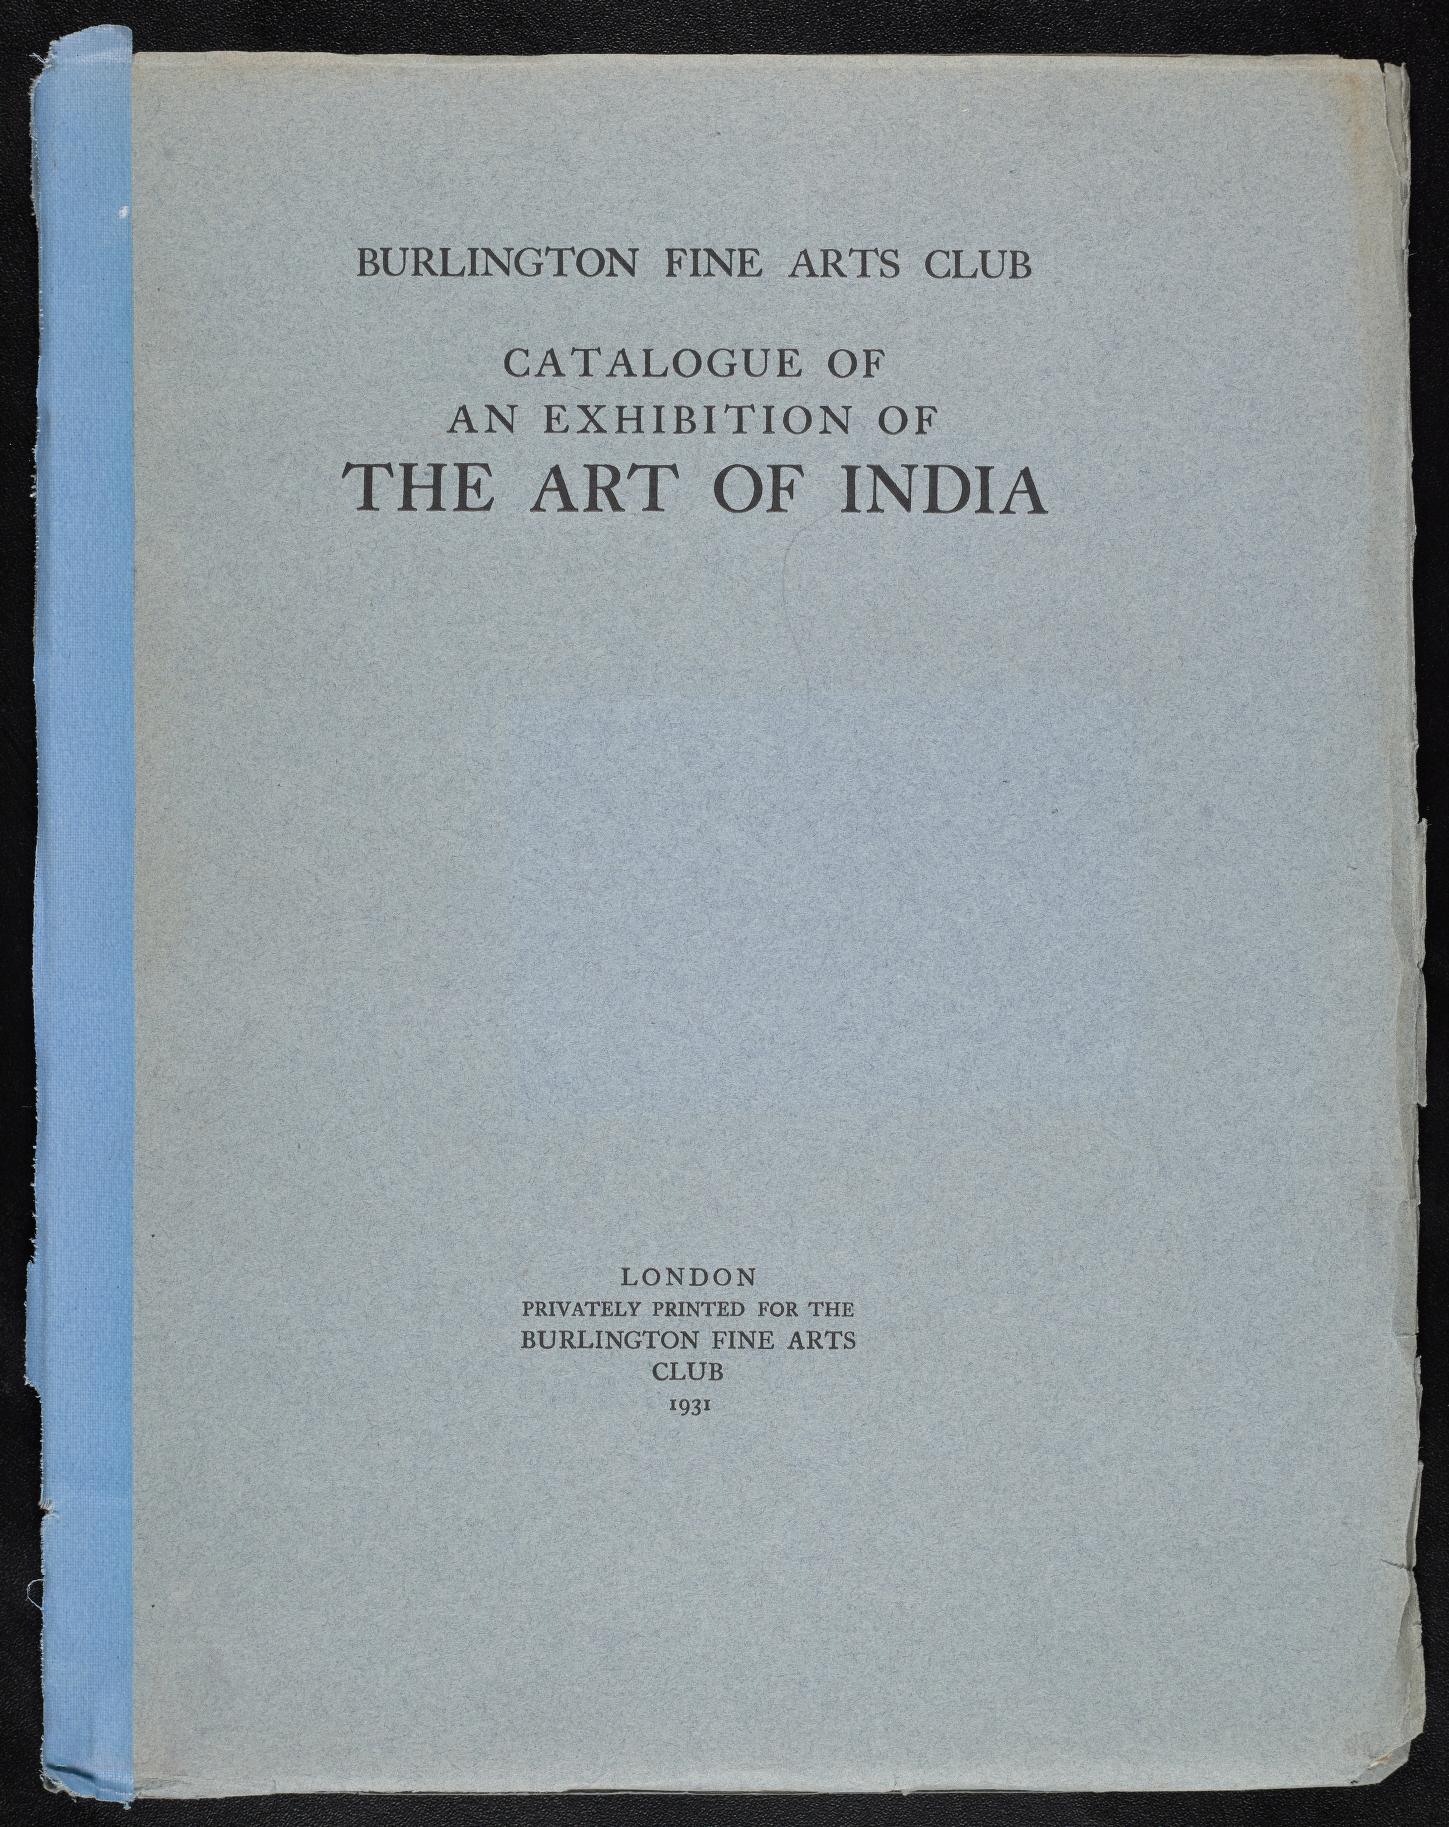 Exciting a Wider Interest in the Art of India”: The 1931 